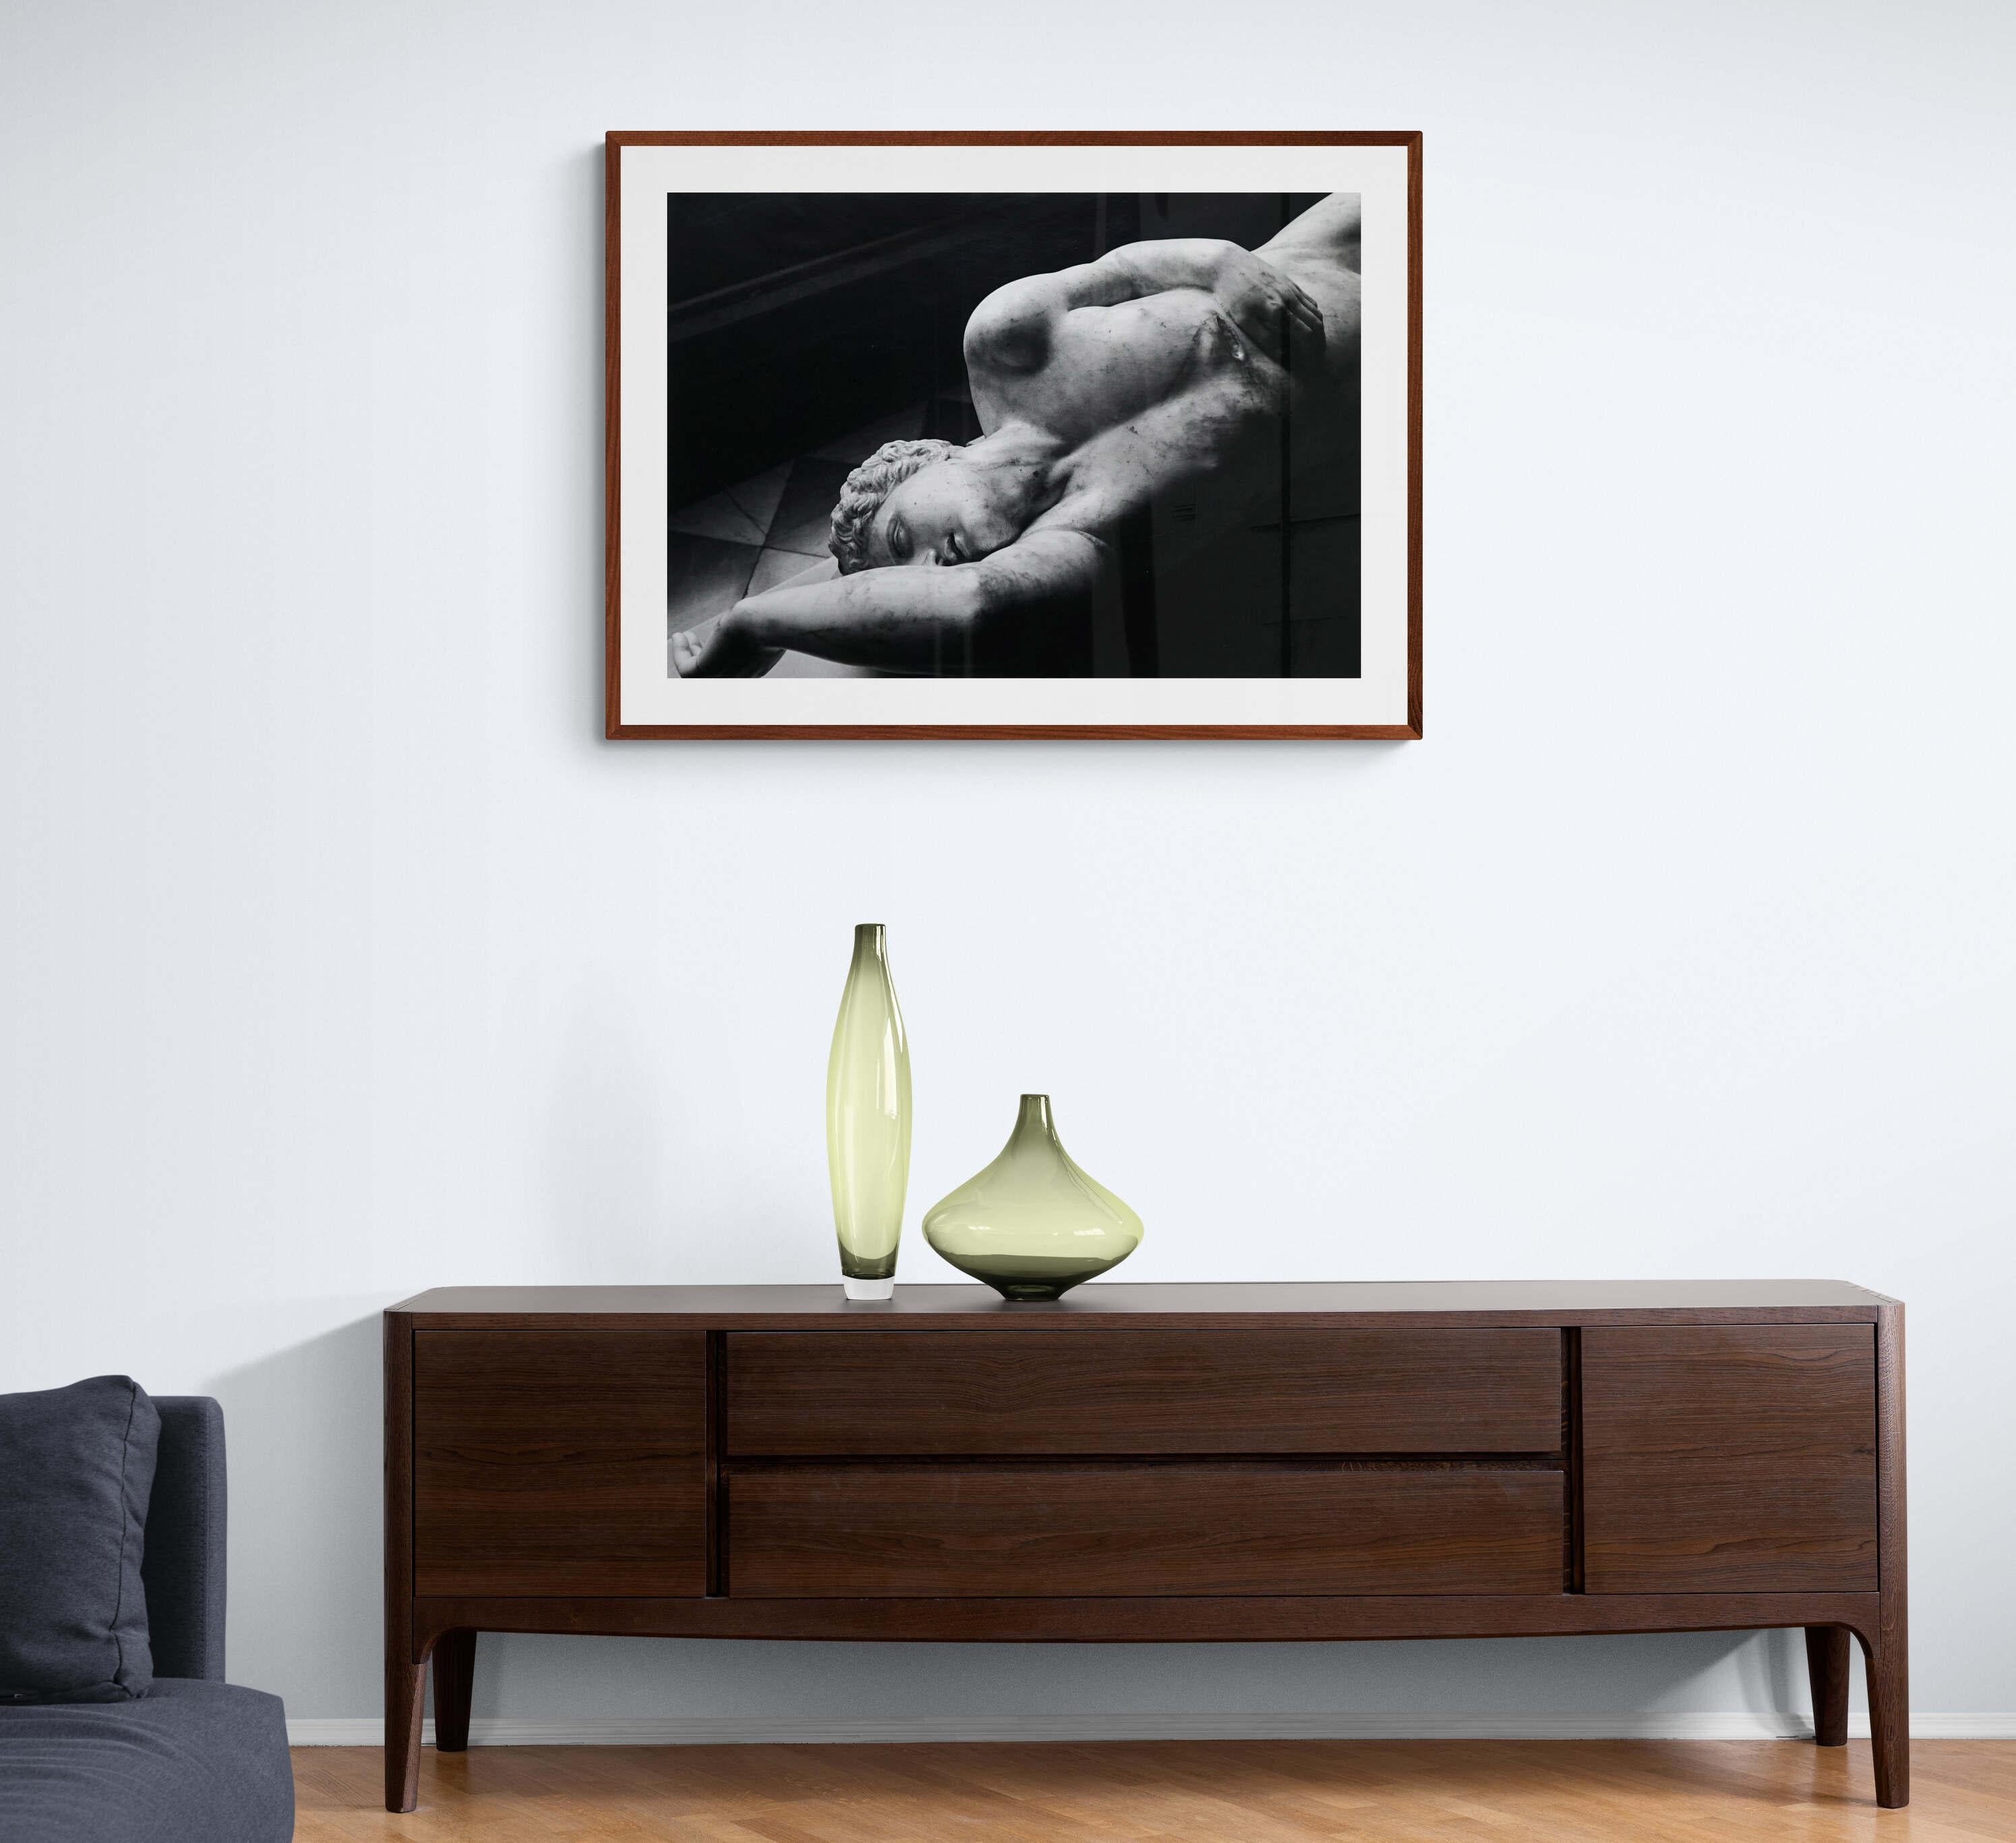 Statuary - Off-Print # 2 - 1976 - Minimalist Black & White Photography For Sale 3